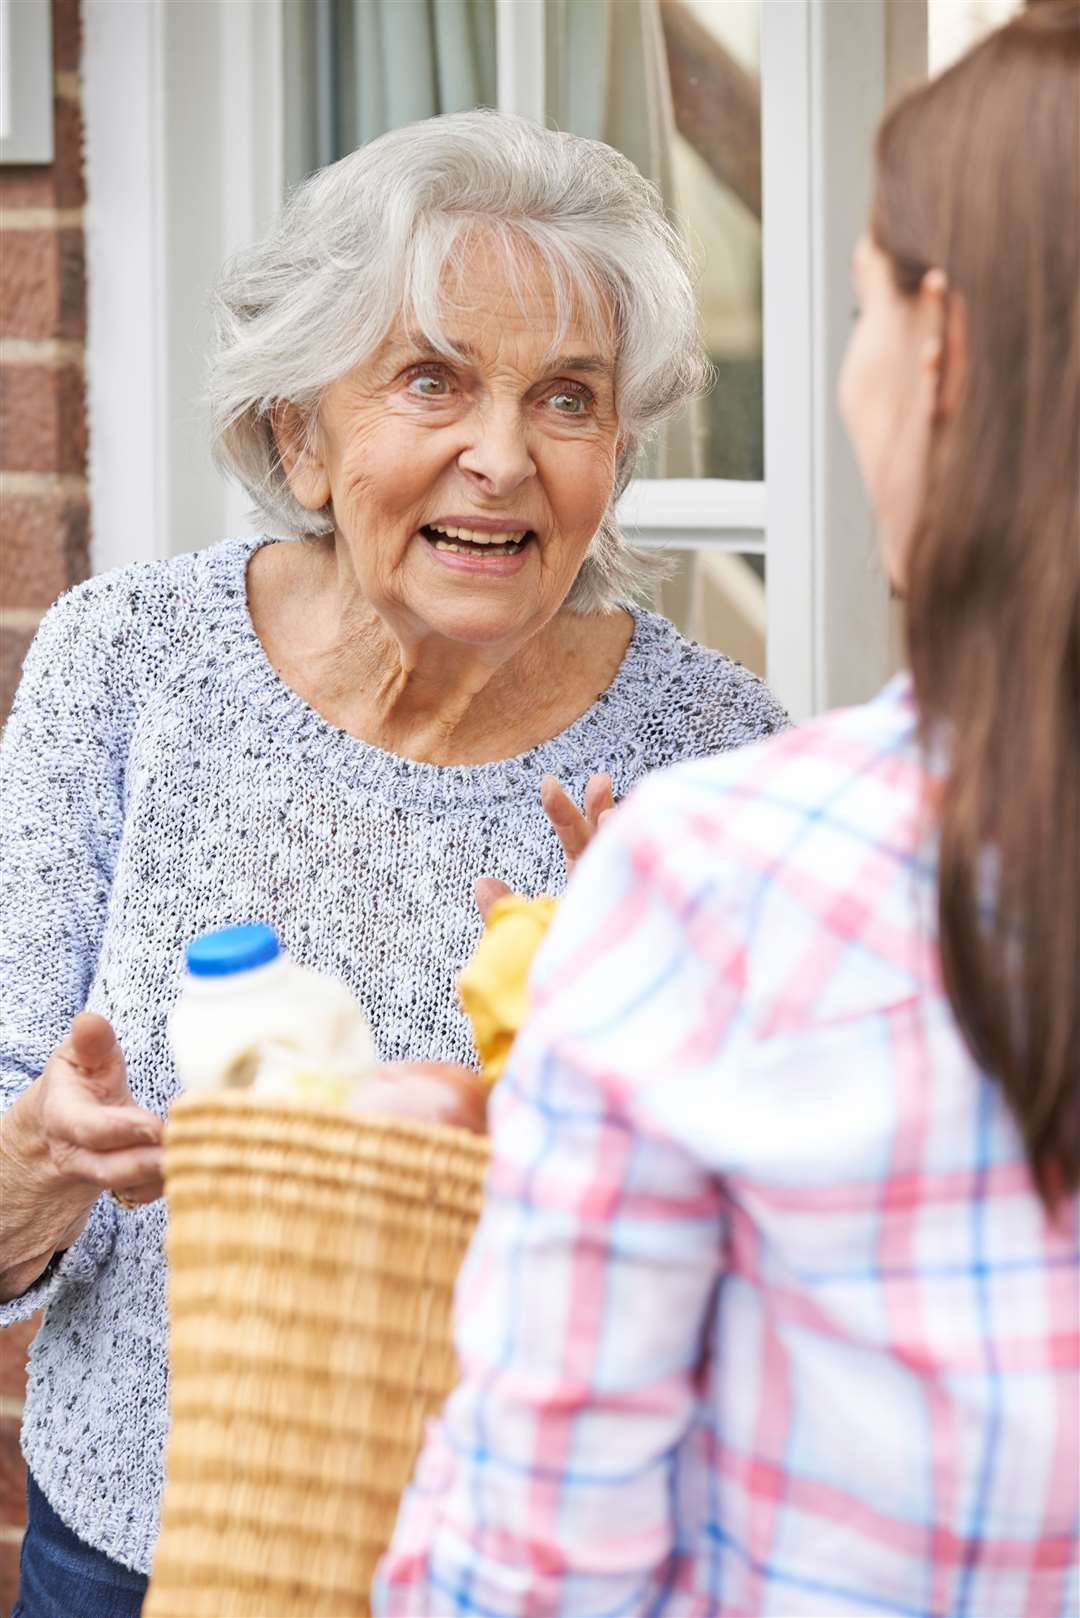 Check on your elderly neighbours